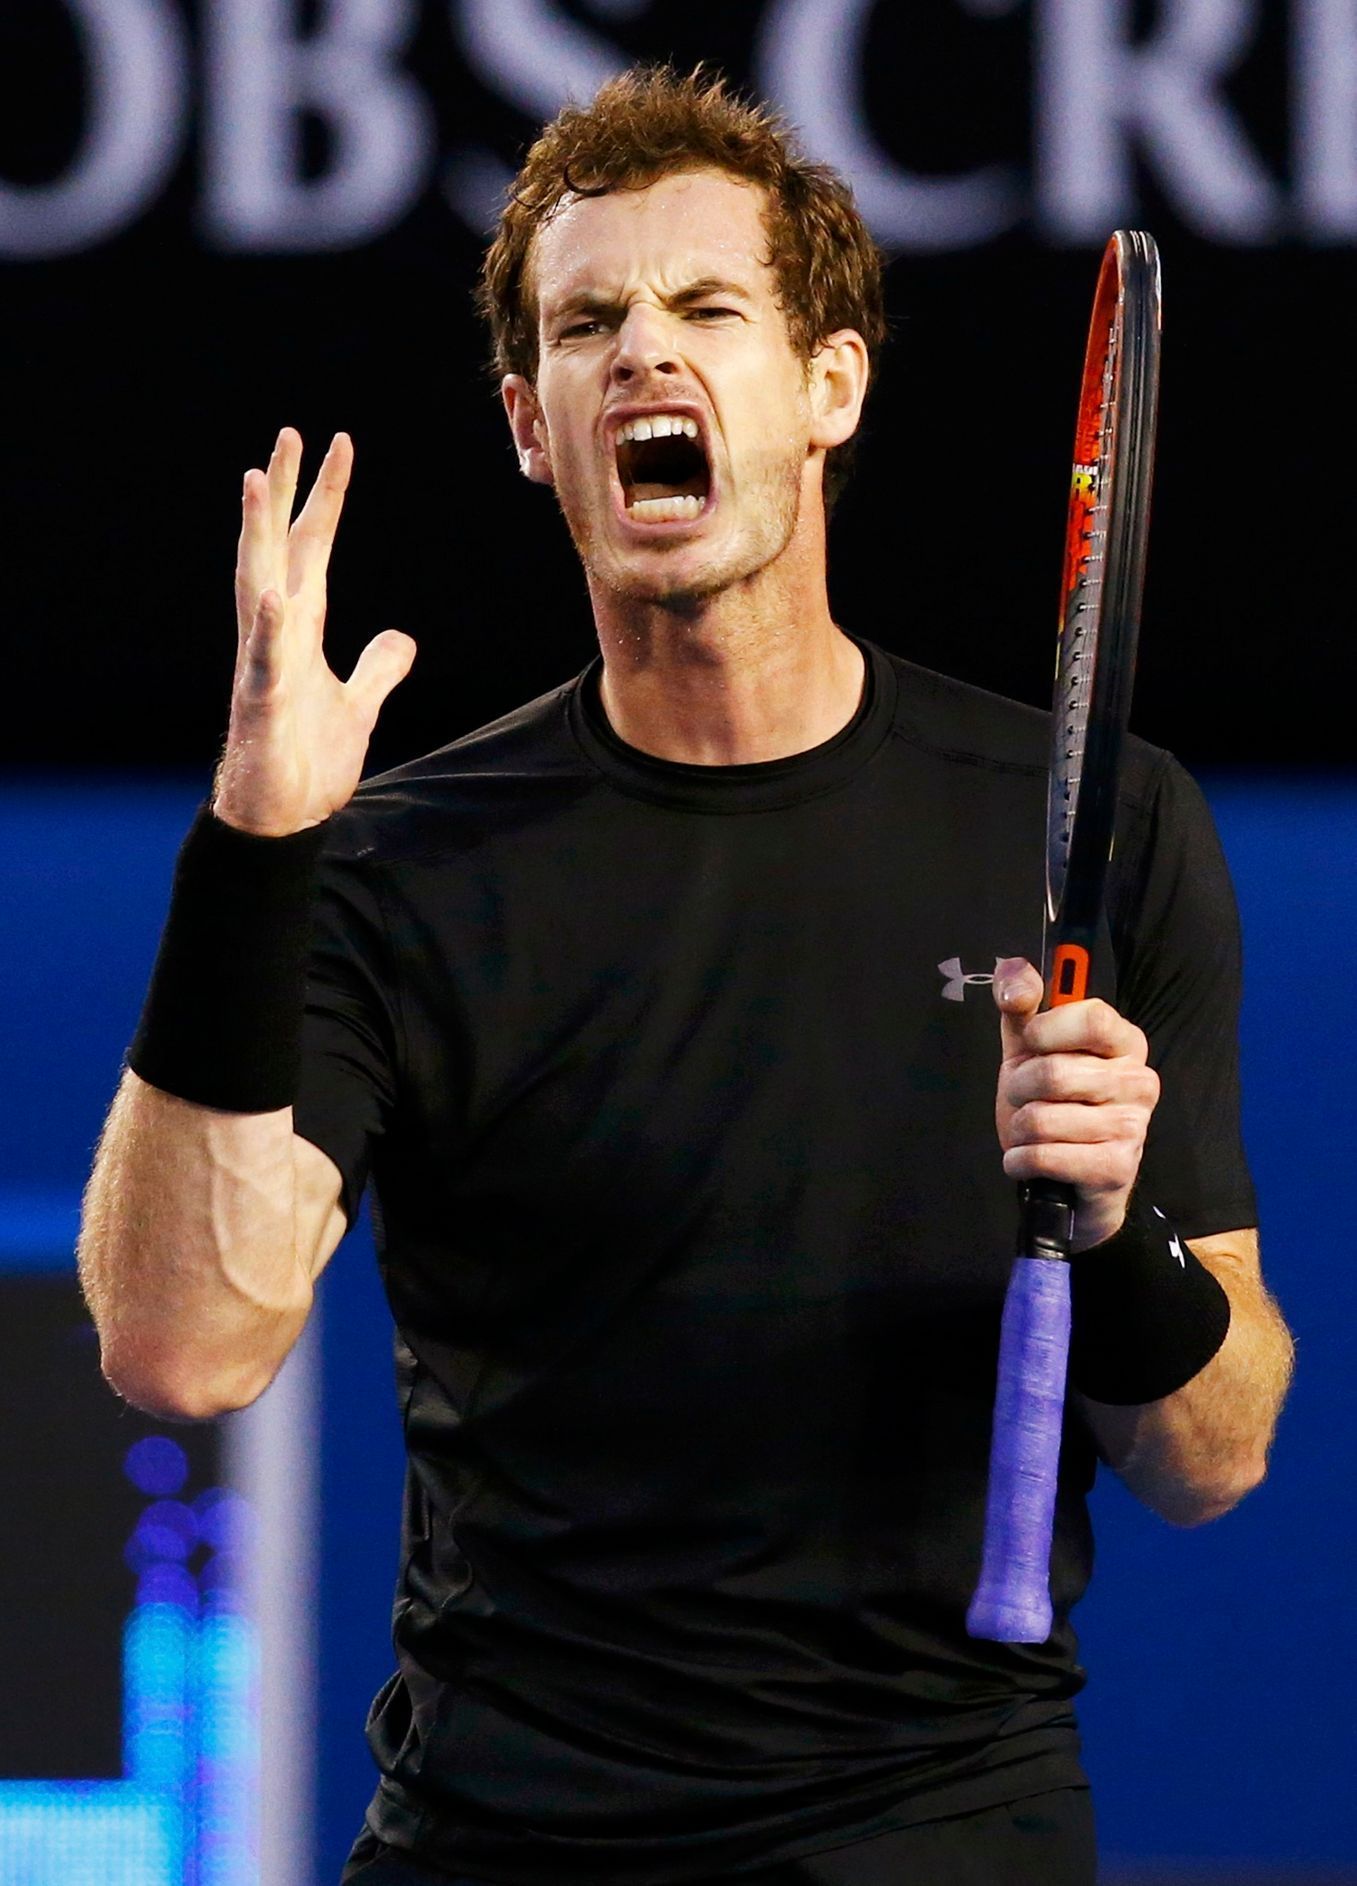 Murray of Britain reacts after hitting a shot against Djokovic of Serbia during their men's singles final match at the Australian Open 2015 tennis tournament in Melbourne